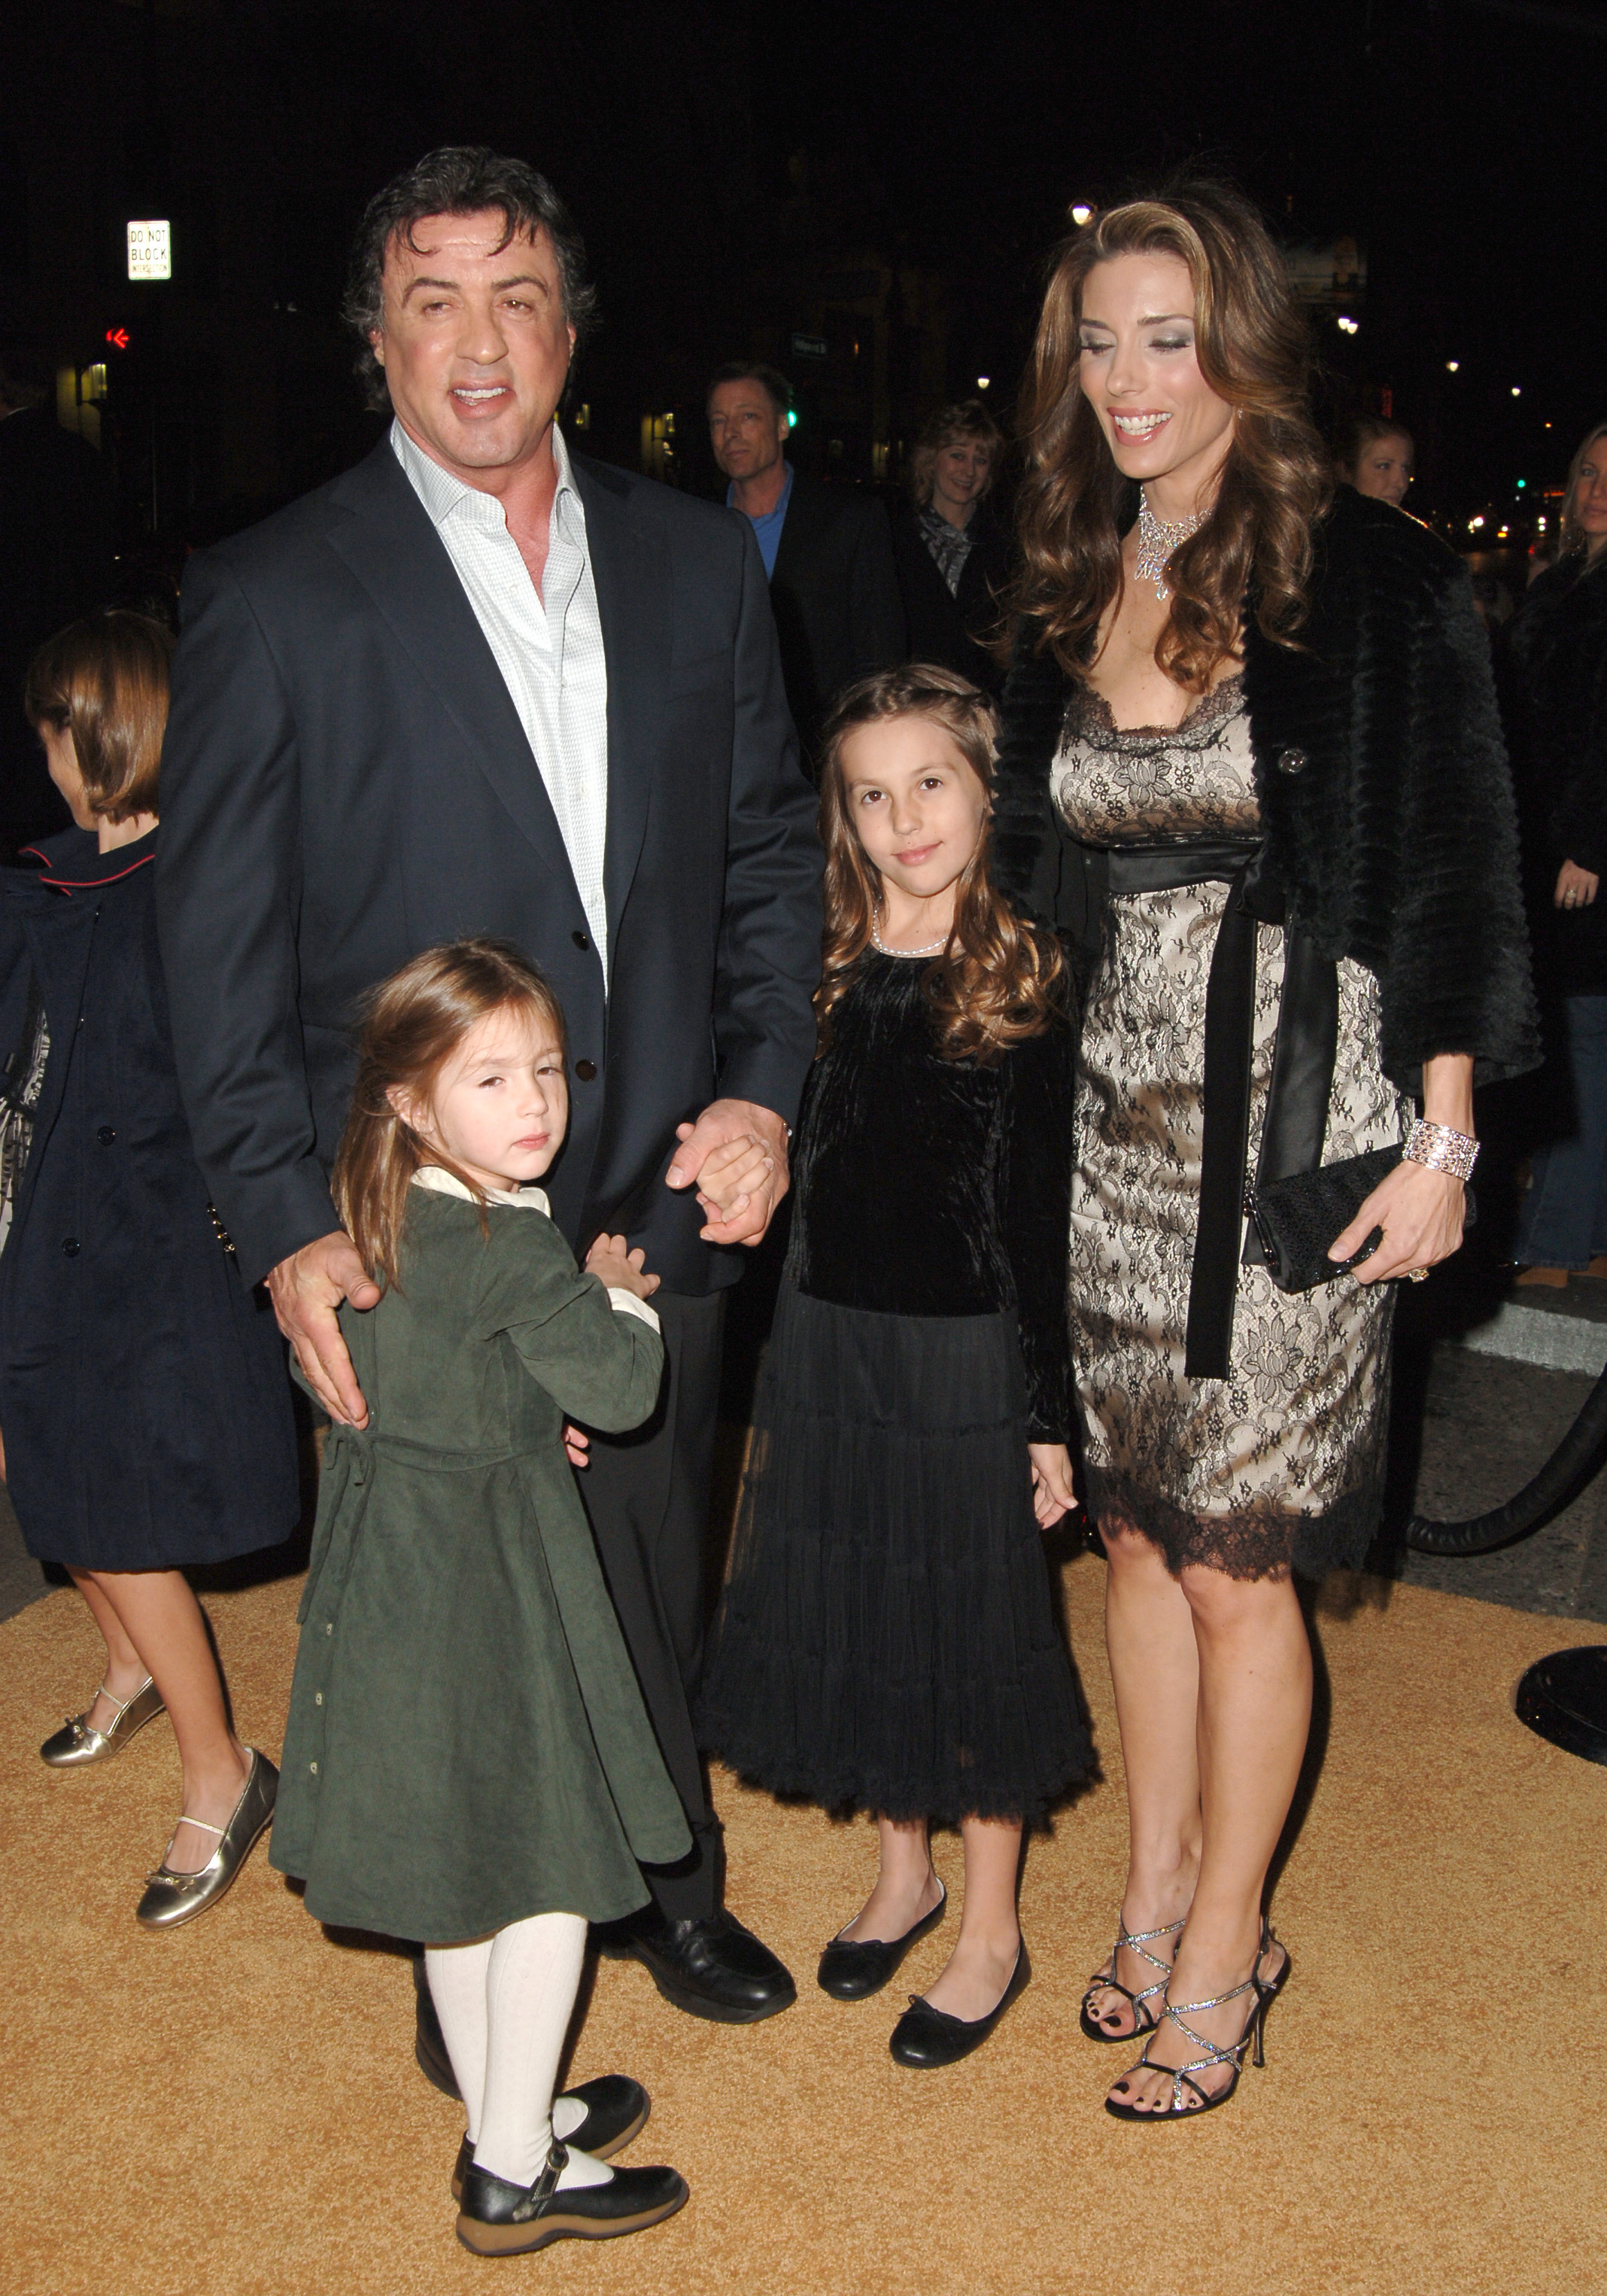 Sylvester Stallone, Jennifer Flavin and kids in Hollywood, California, United States, 2006 | Source: Getty Images